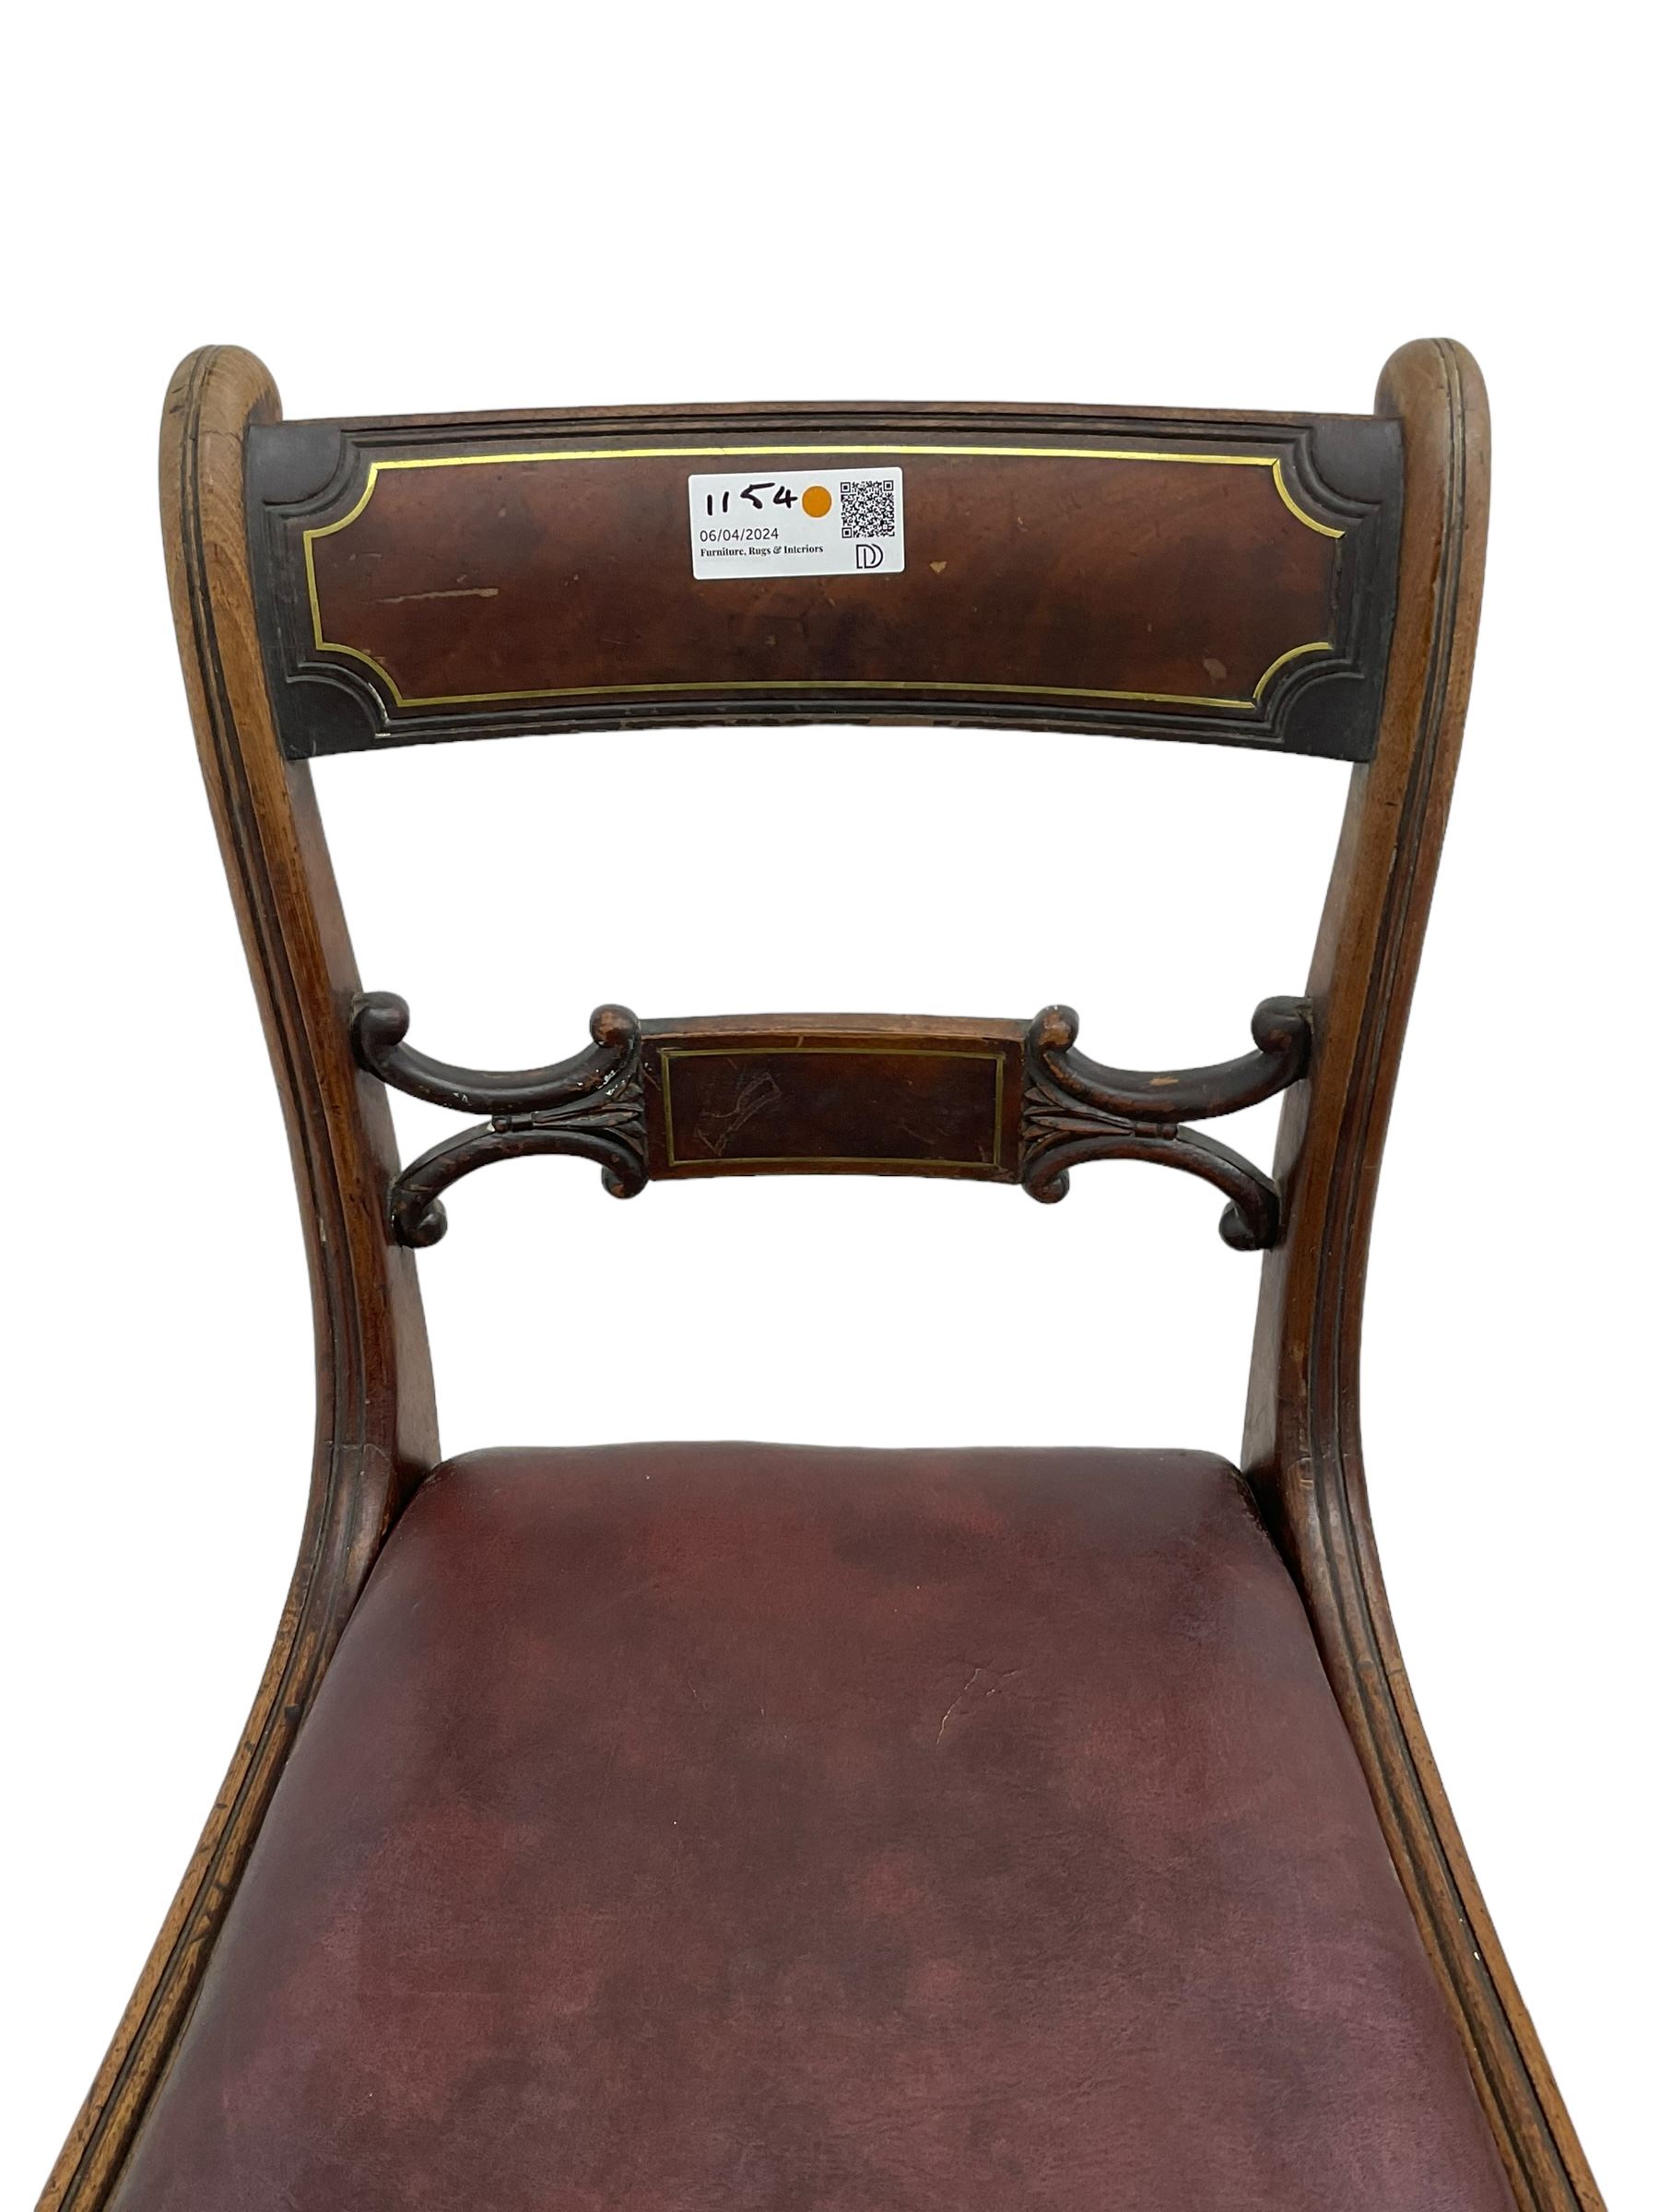 Collection of early 19th century Regency period dining chairs - set of three early 19th century maho - Image 2 of 8